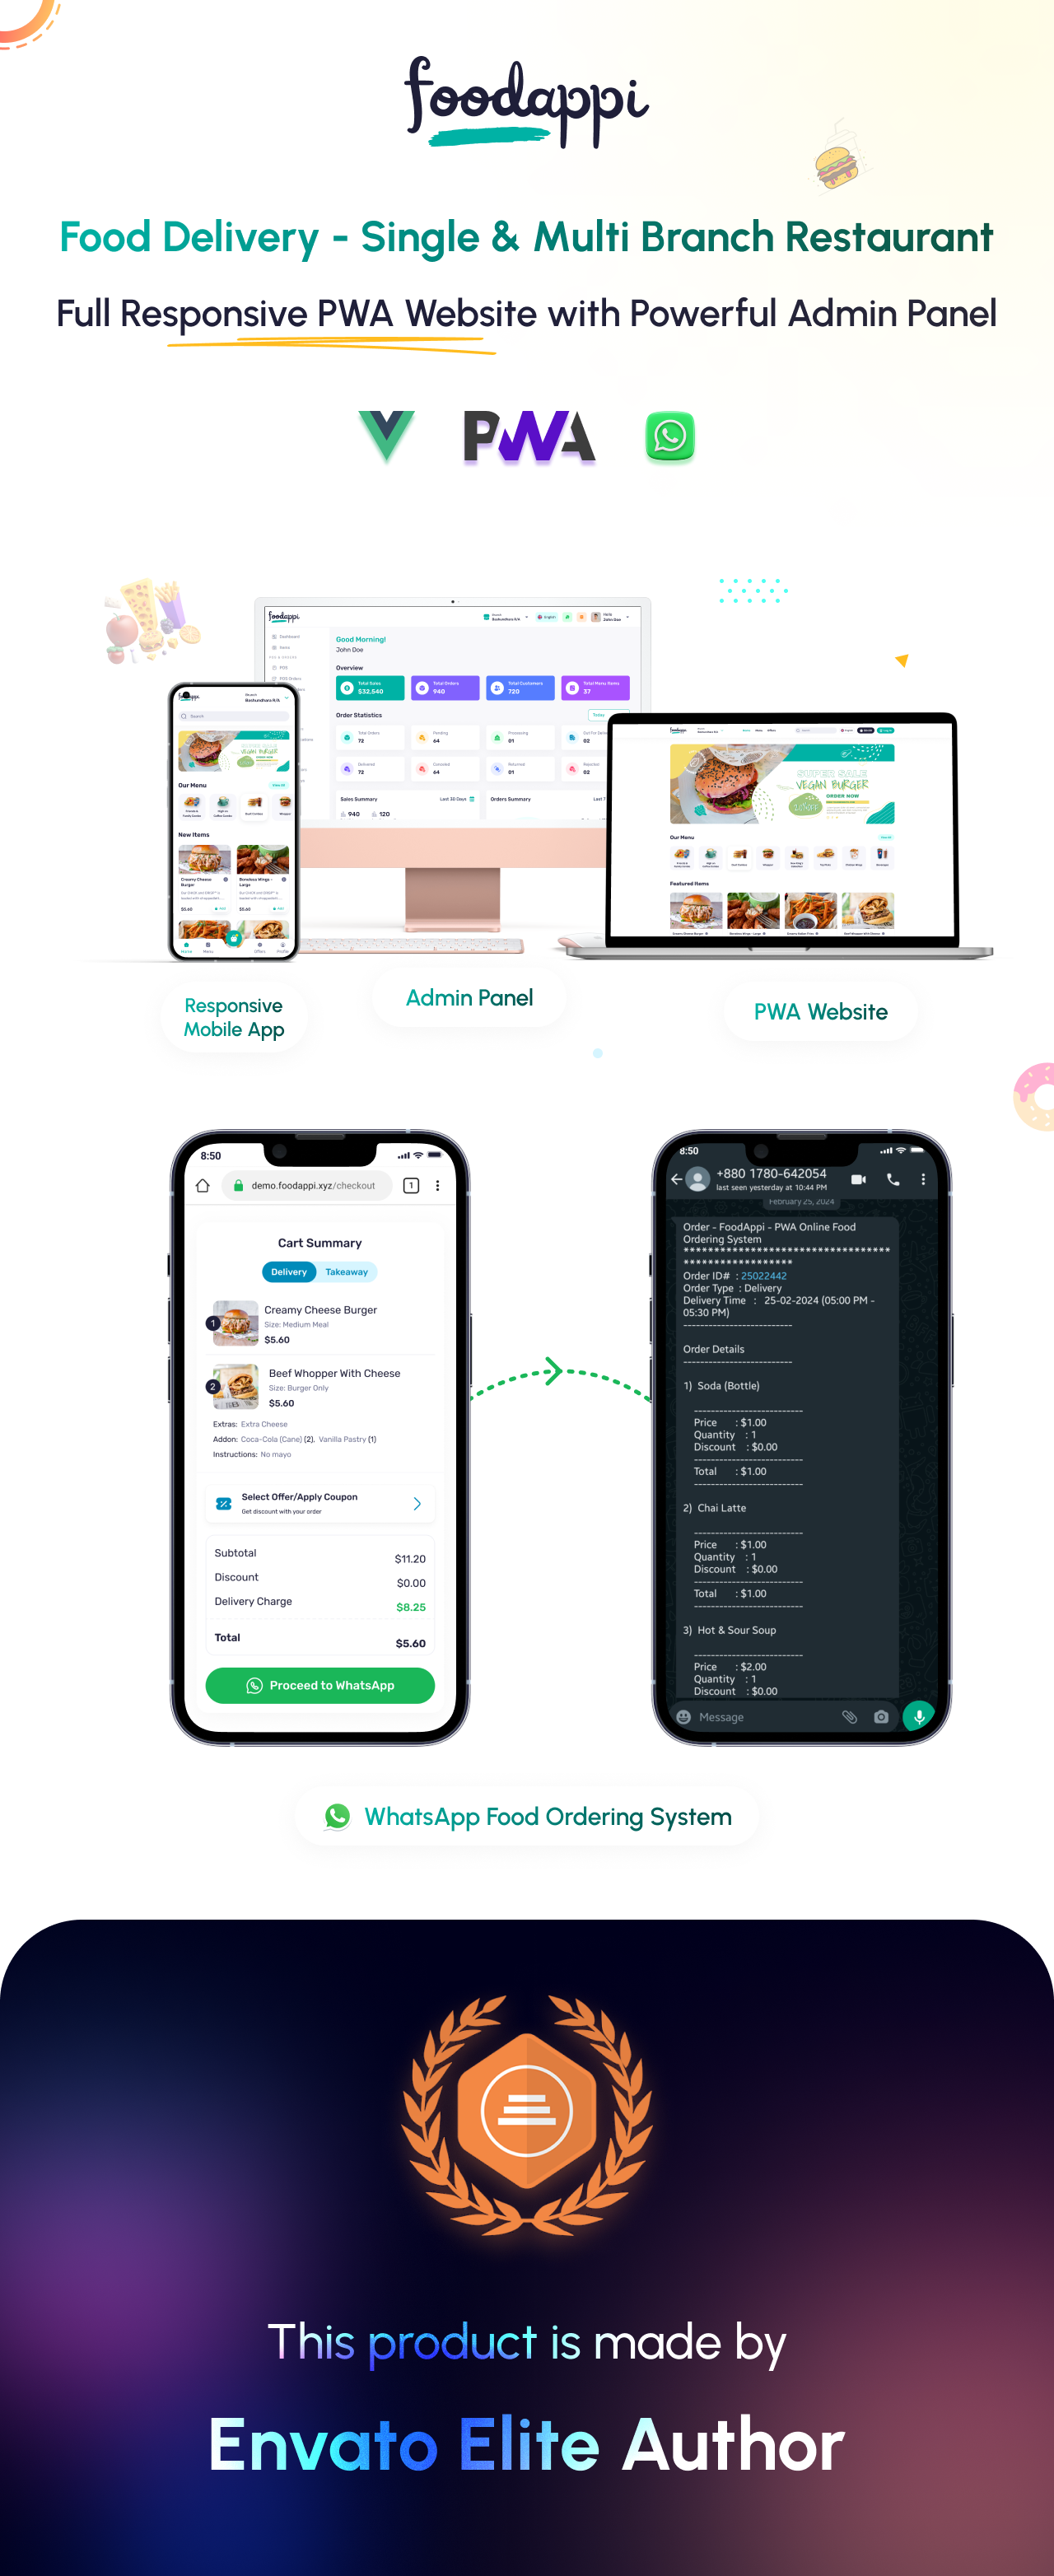 What's included with the FoodAppi PWA food delivery system application, made by Envato elite author